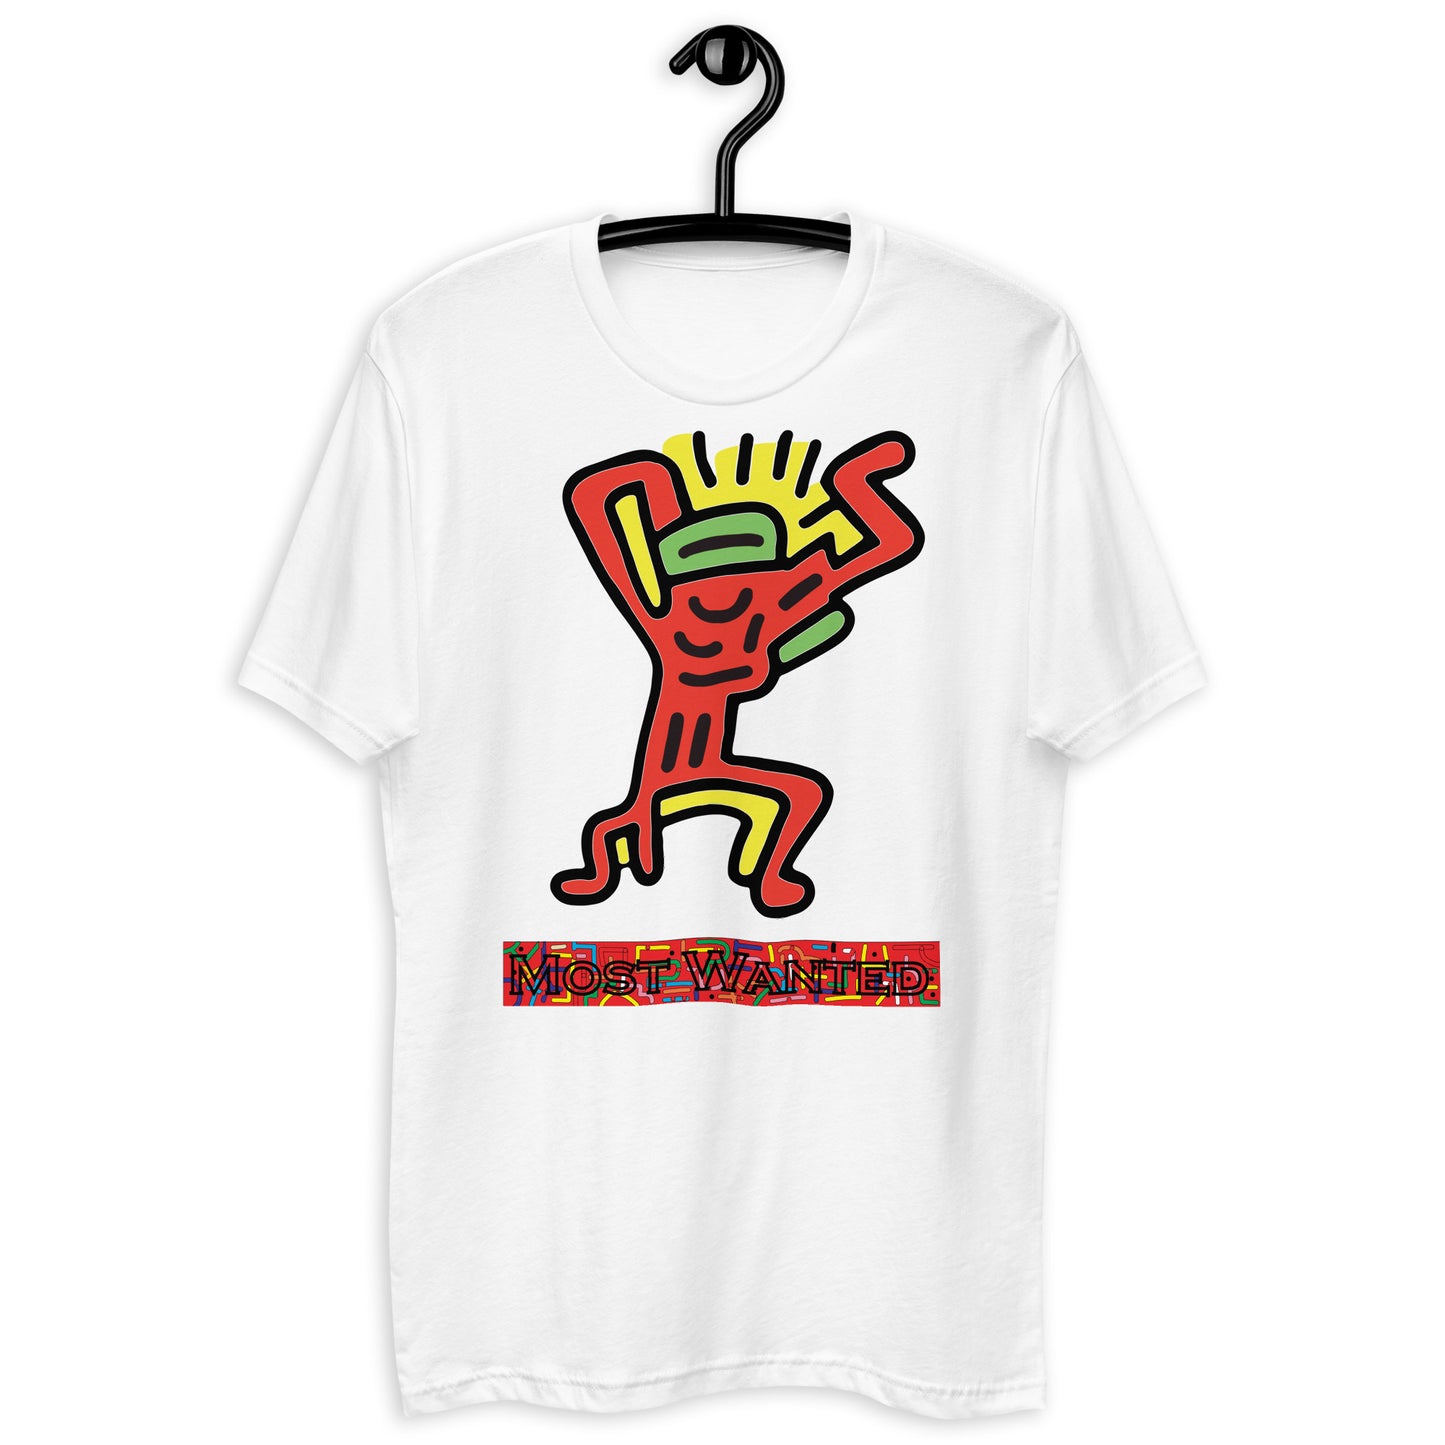 Doodles Me "Most Wanted" T-shirt #3